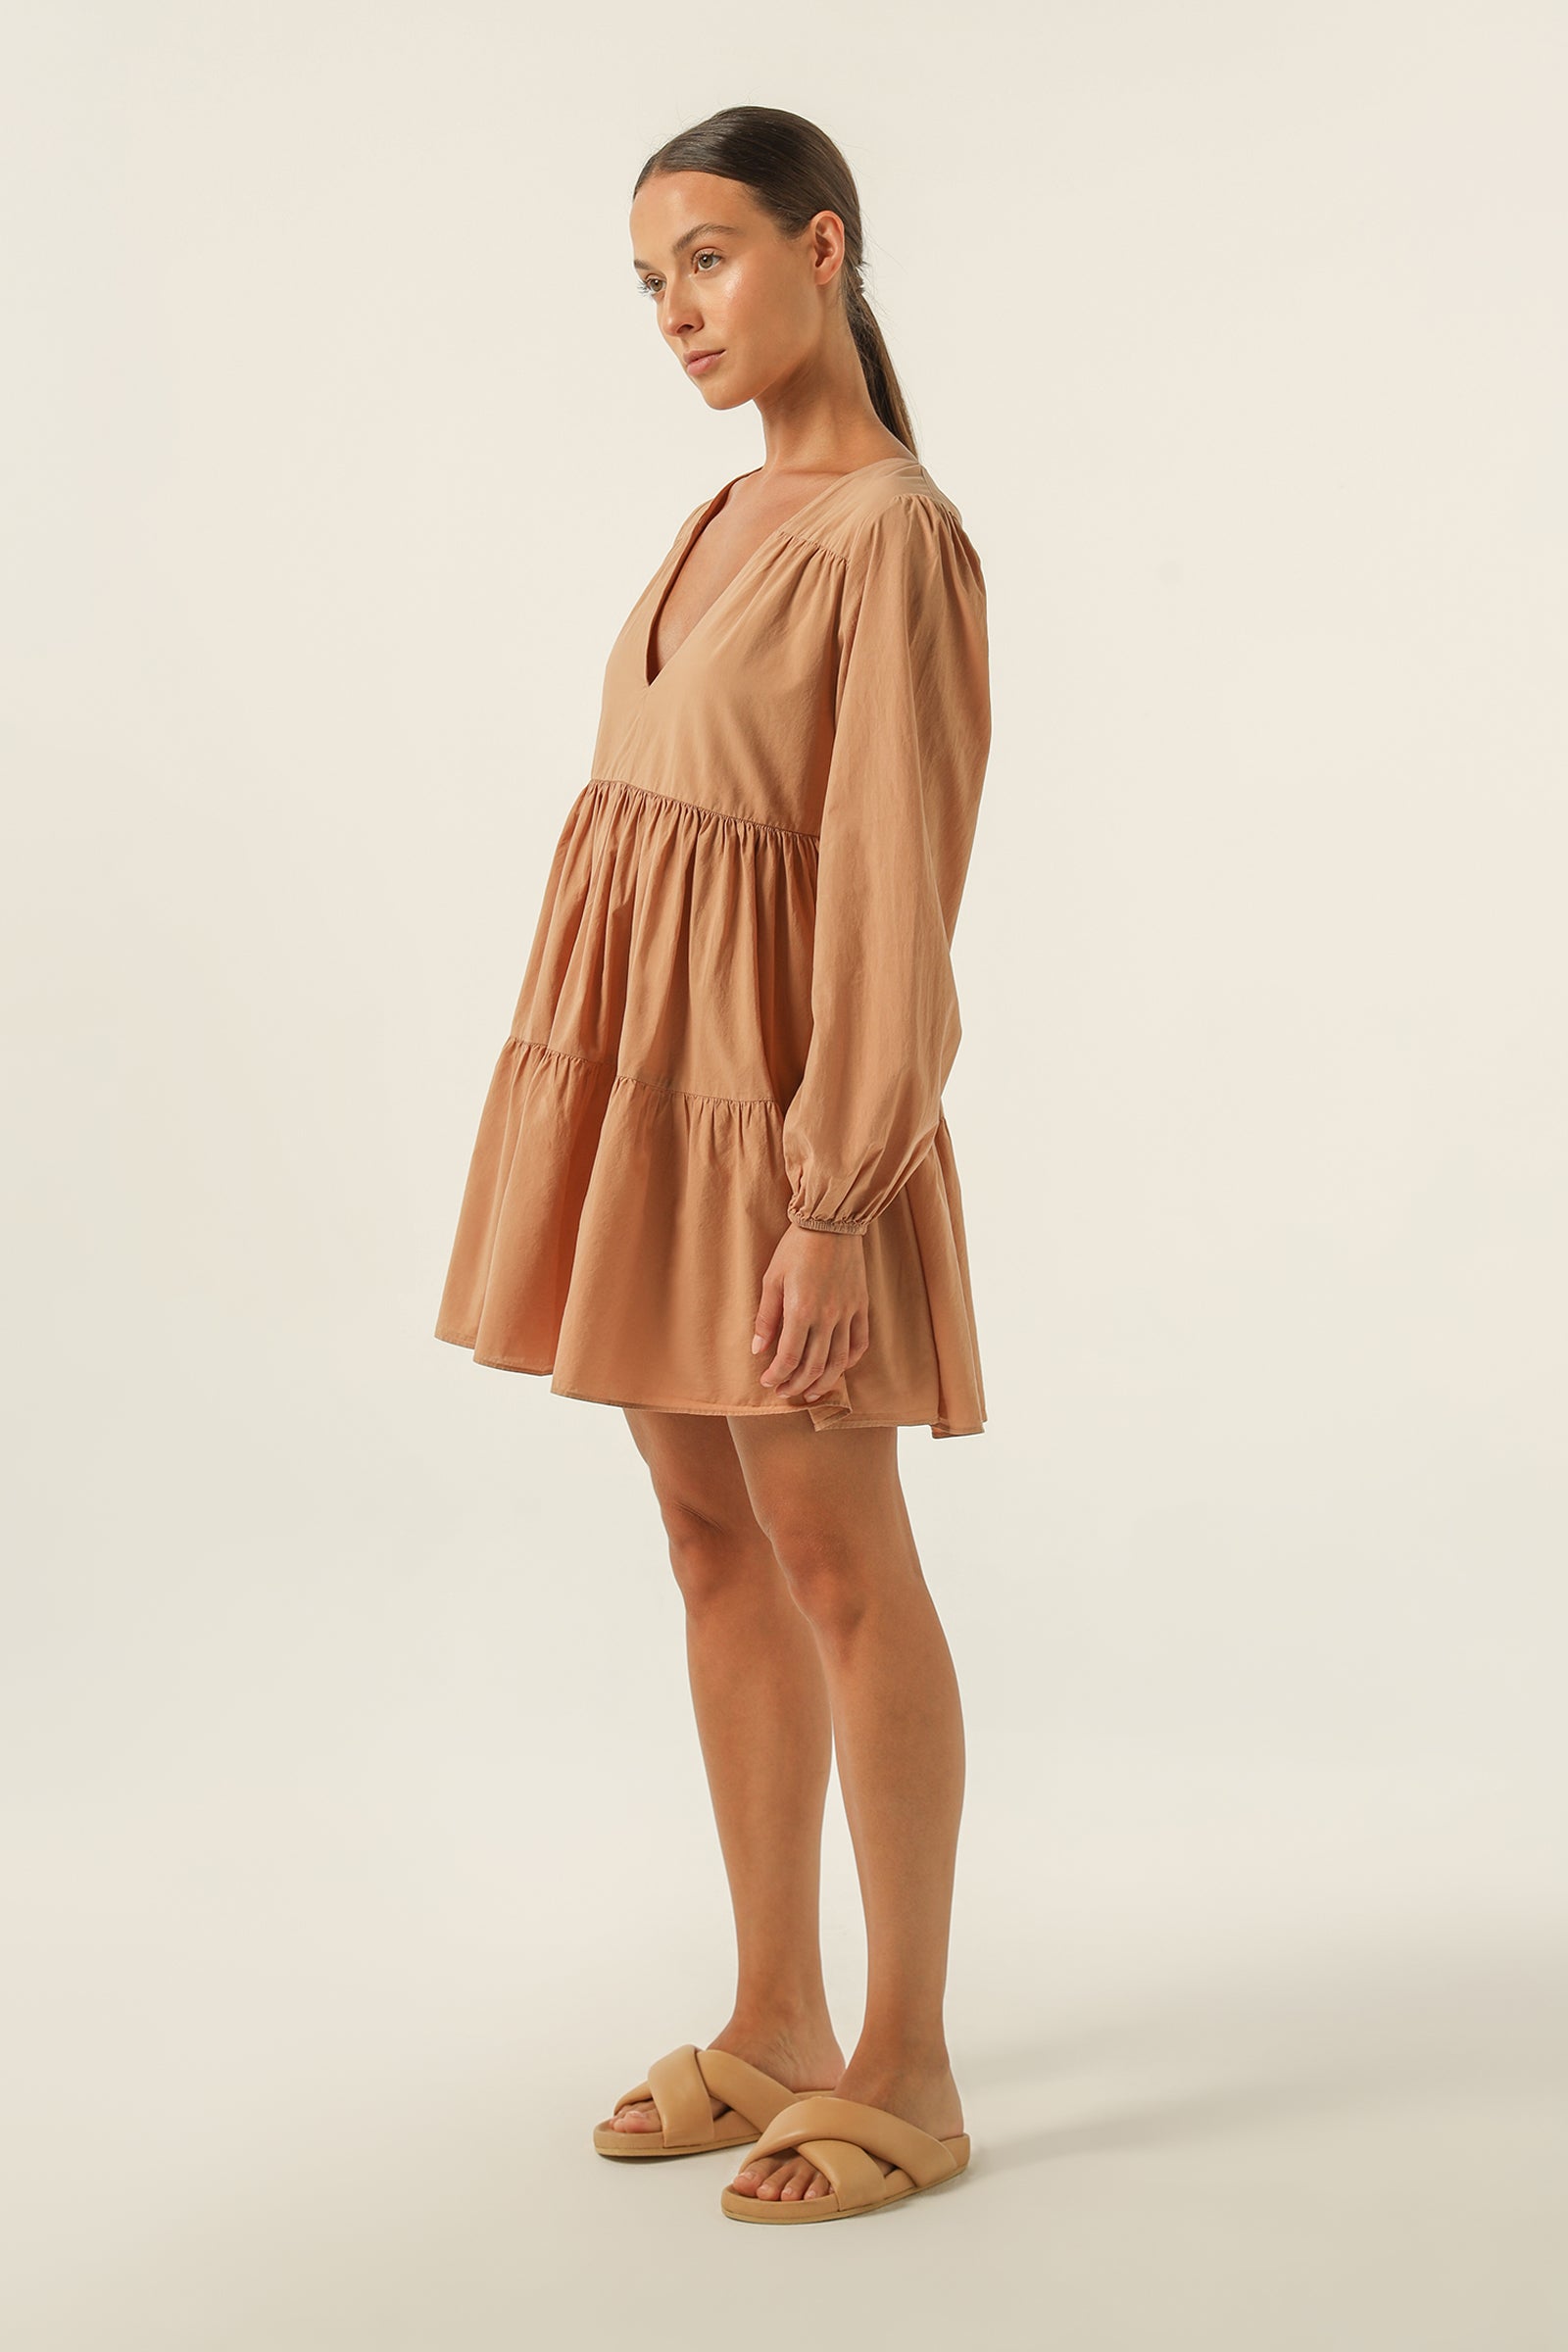 Nude Lucy Rylee Mini Dress In A Brown Coffee Colour 